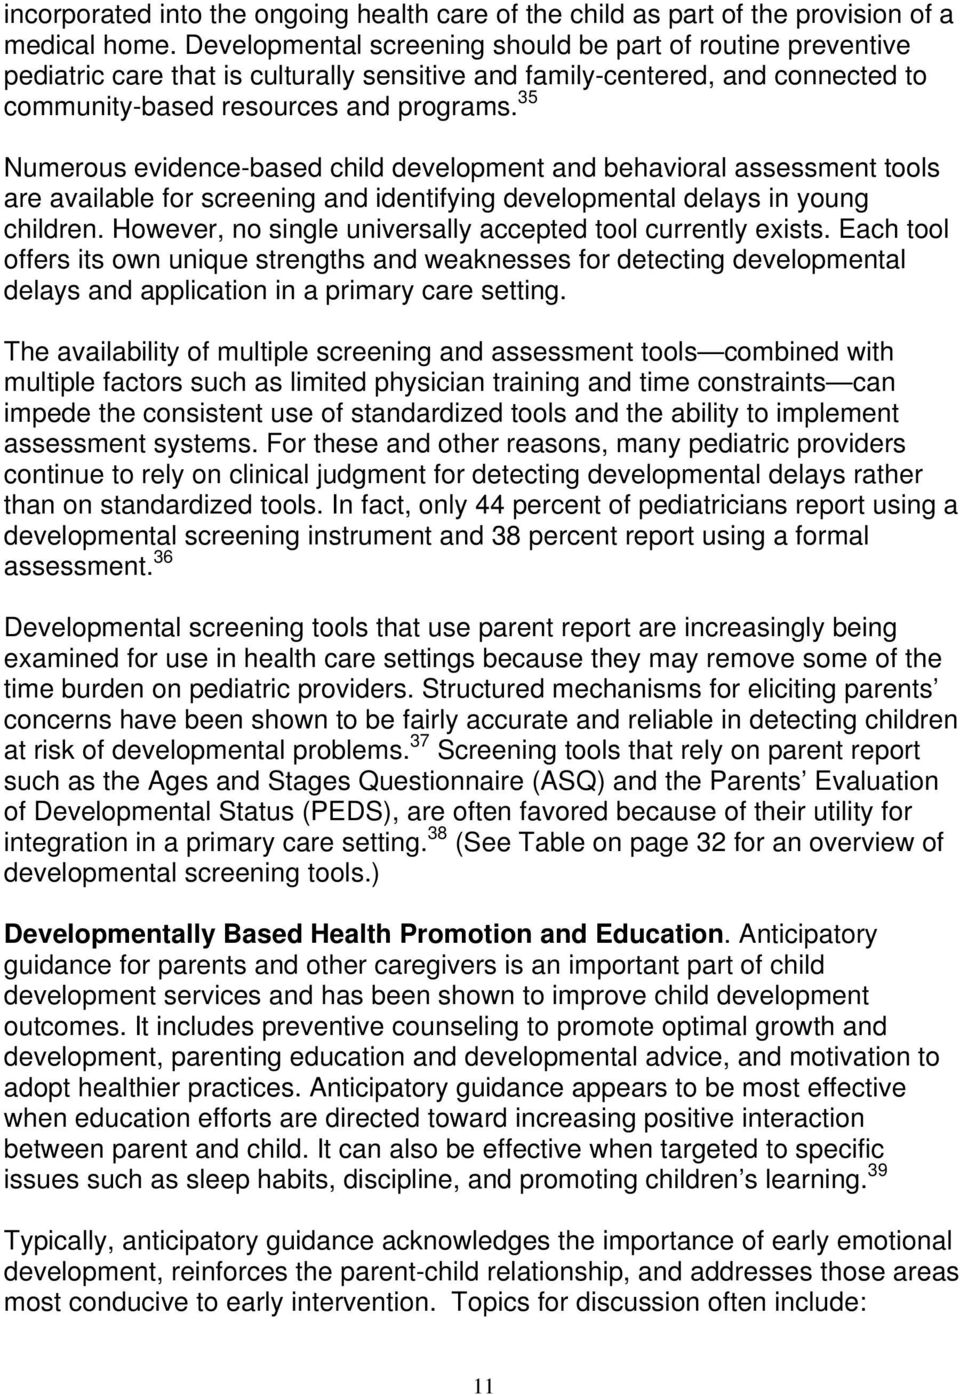 35 Numerous evidence-based child development and behavioral assessment tools are available for screening and identifying developmental delays in young children.